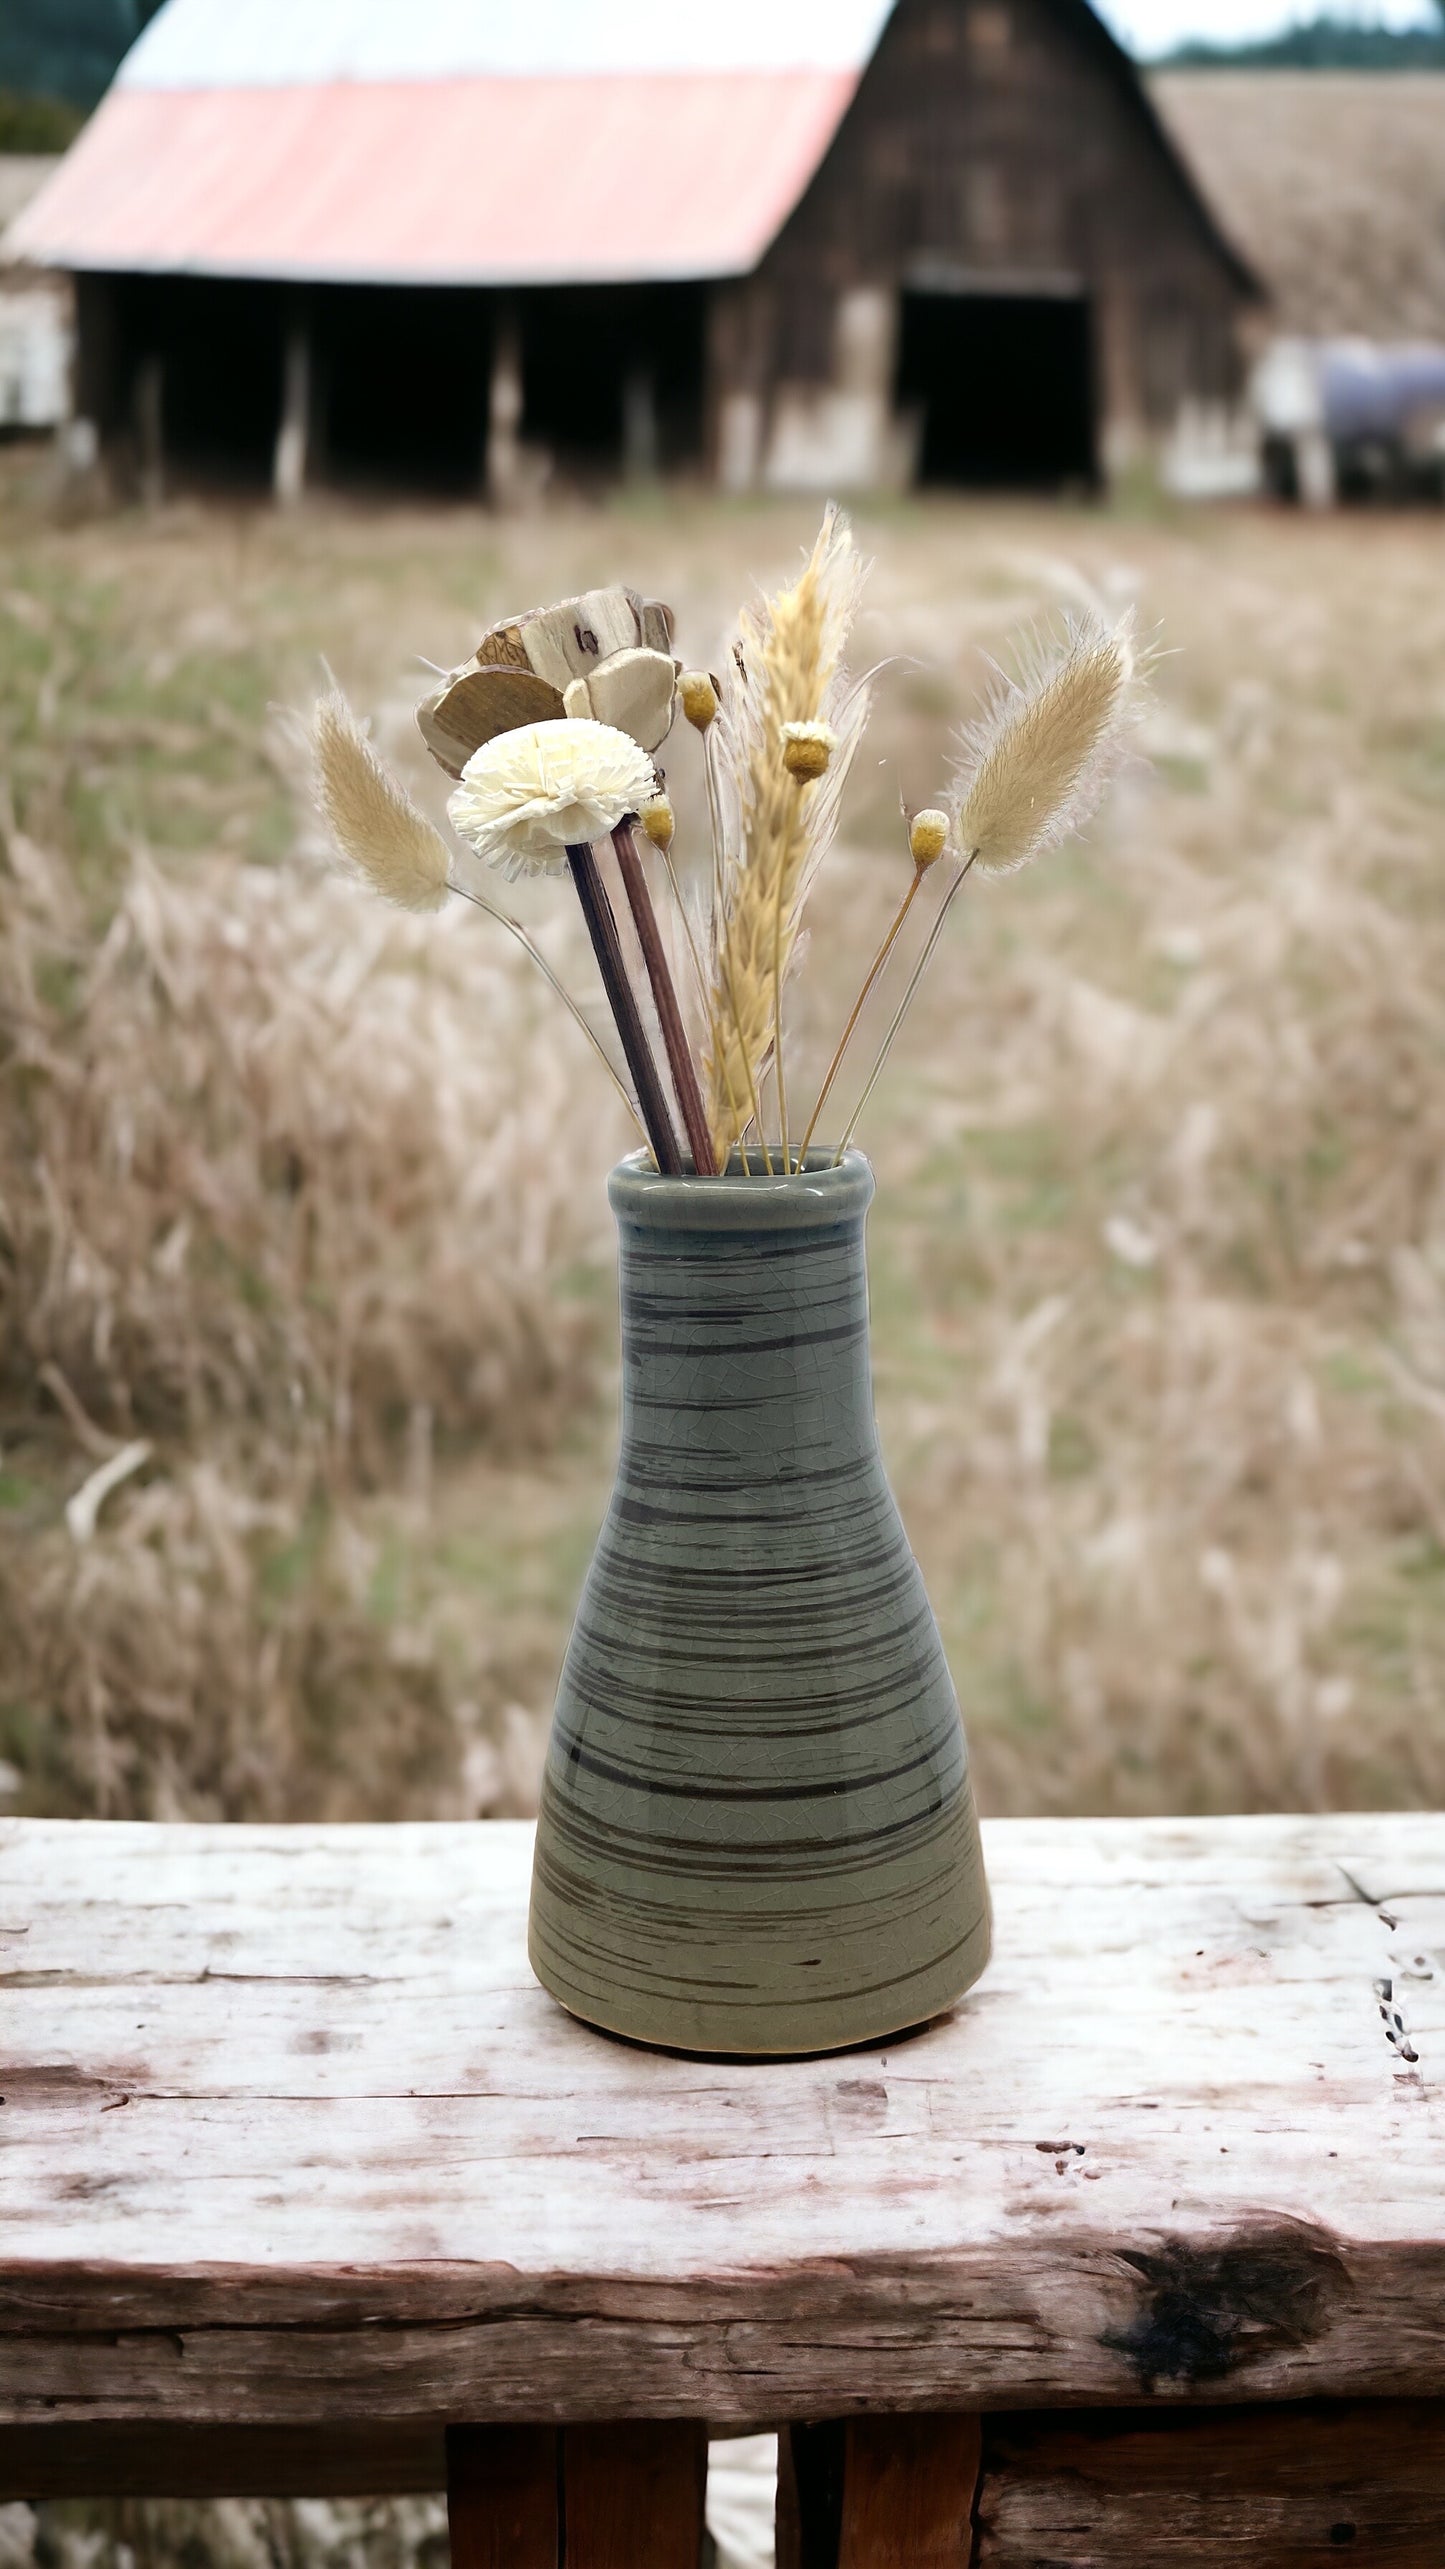 Reed Diffuser Replacement Sticks, The Great Plains, Rattan Wood Flower